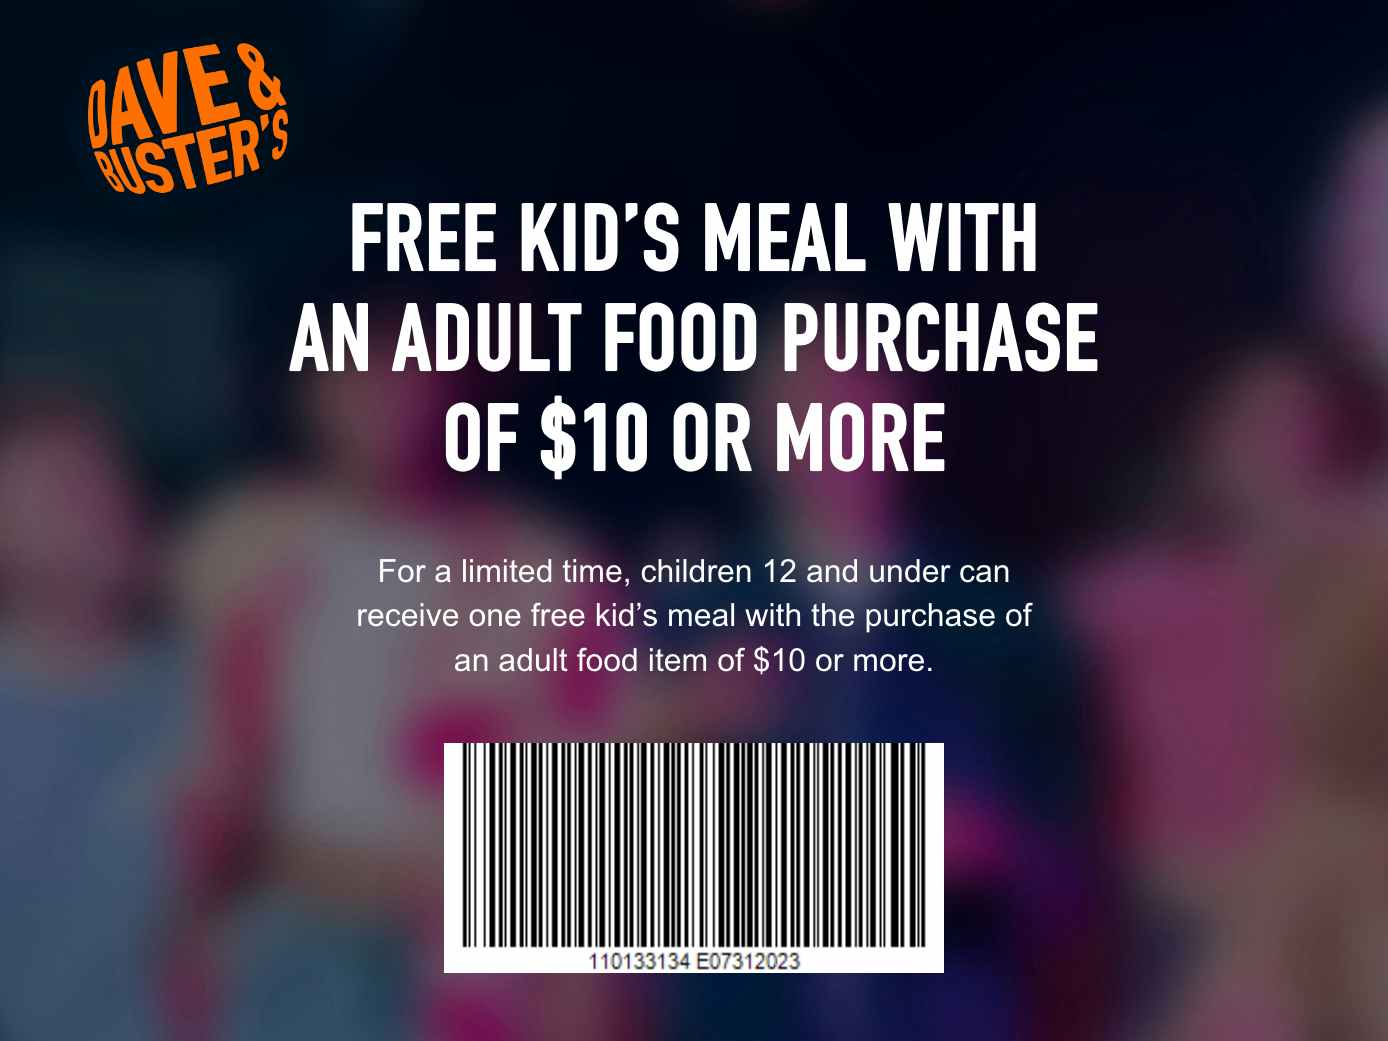 Dave & Buster's - Up To 25% Off - Dayton